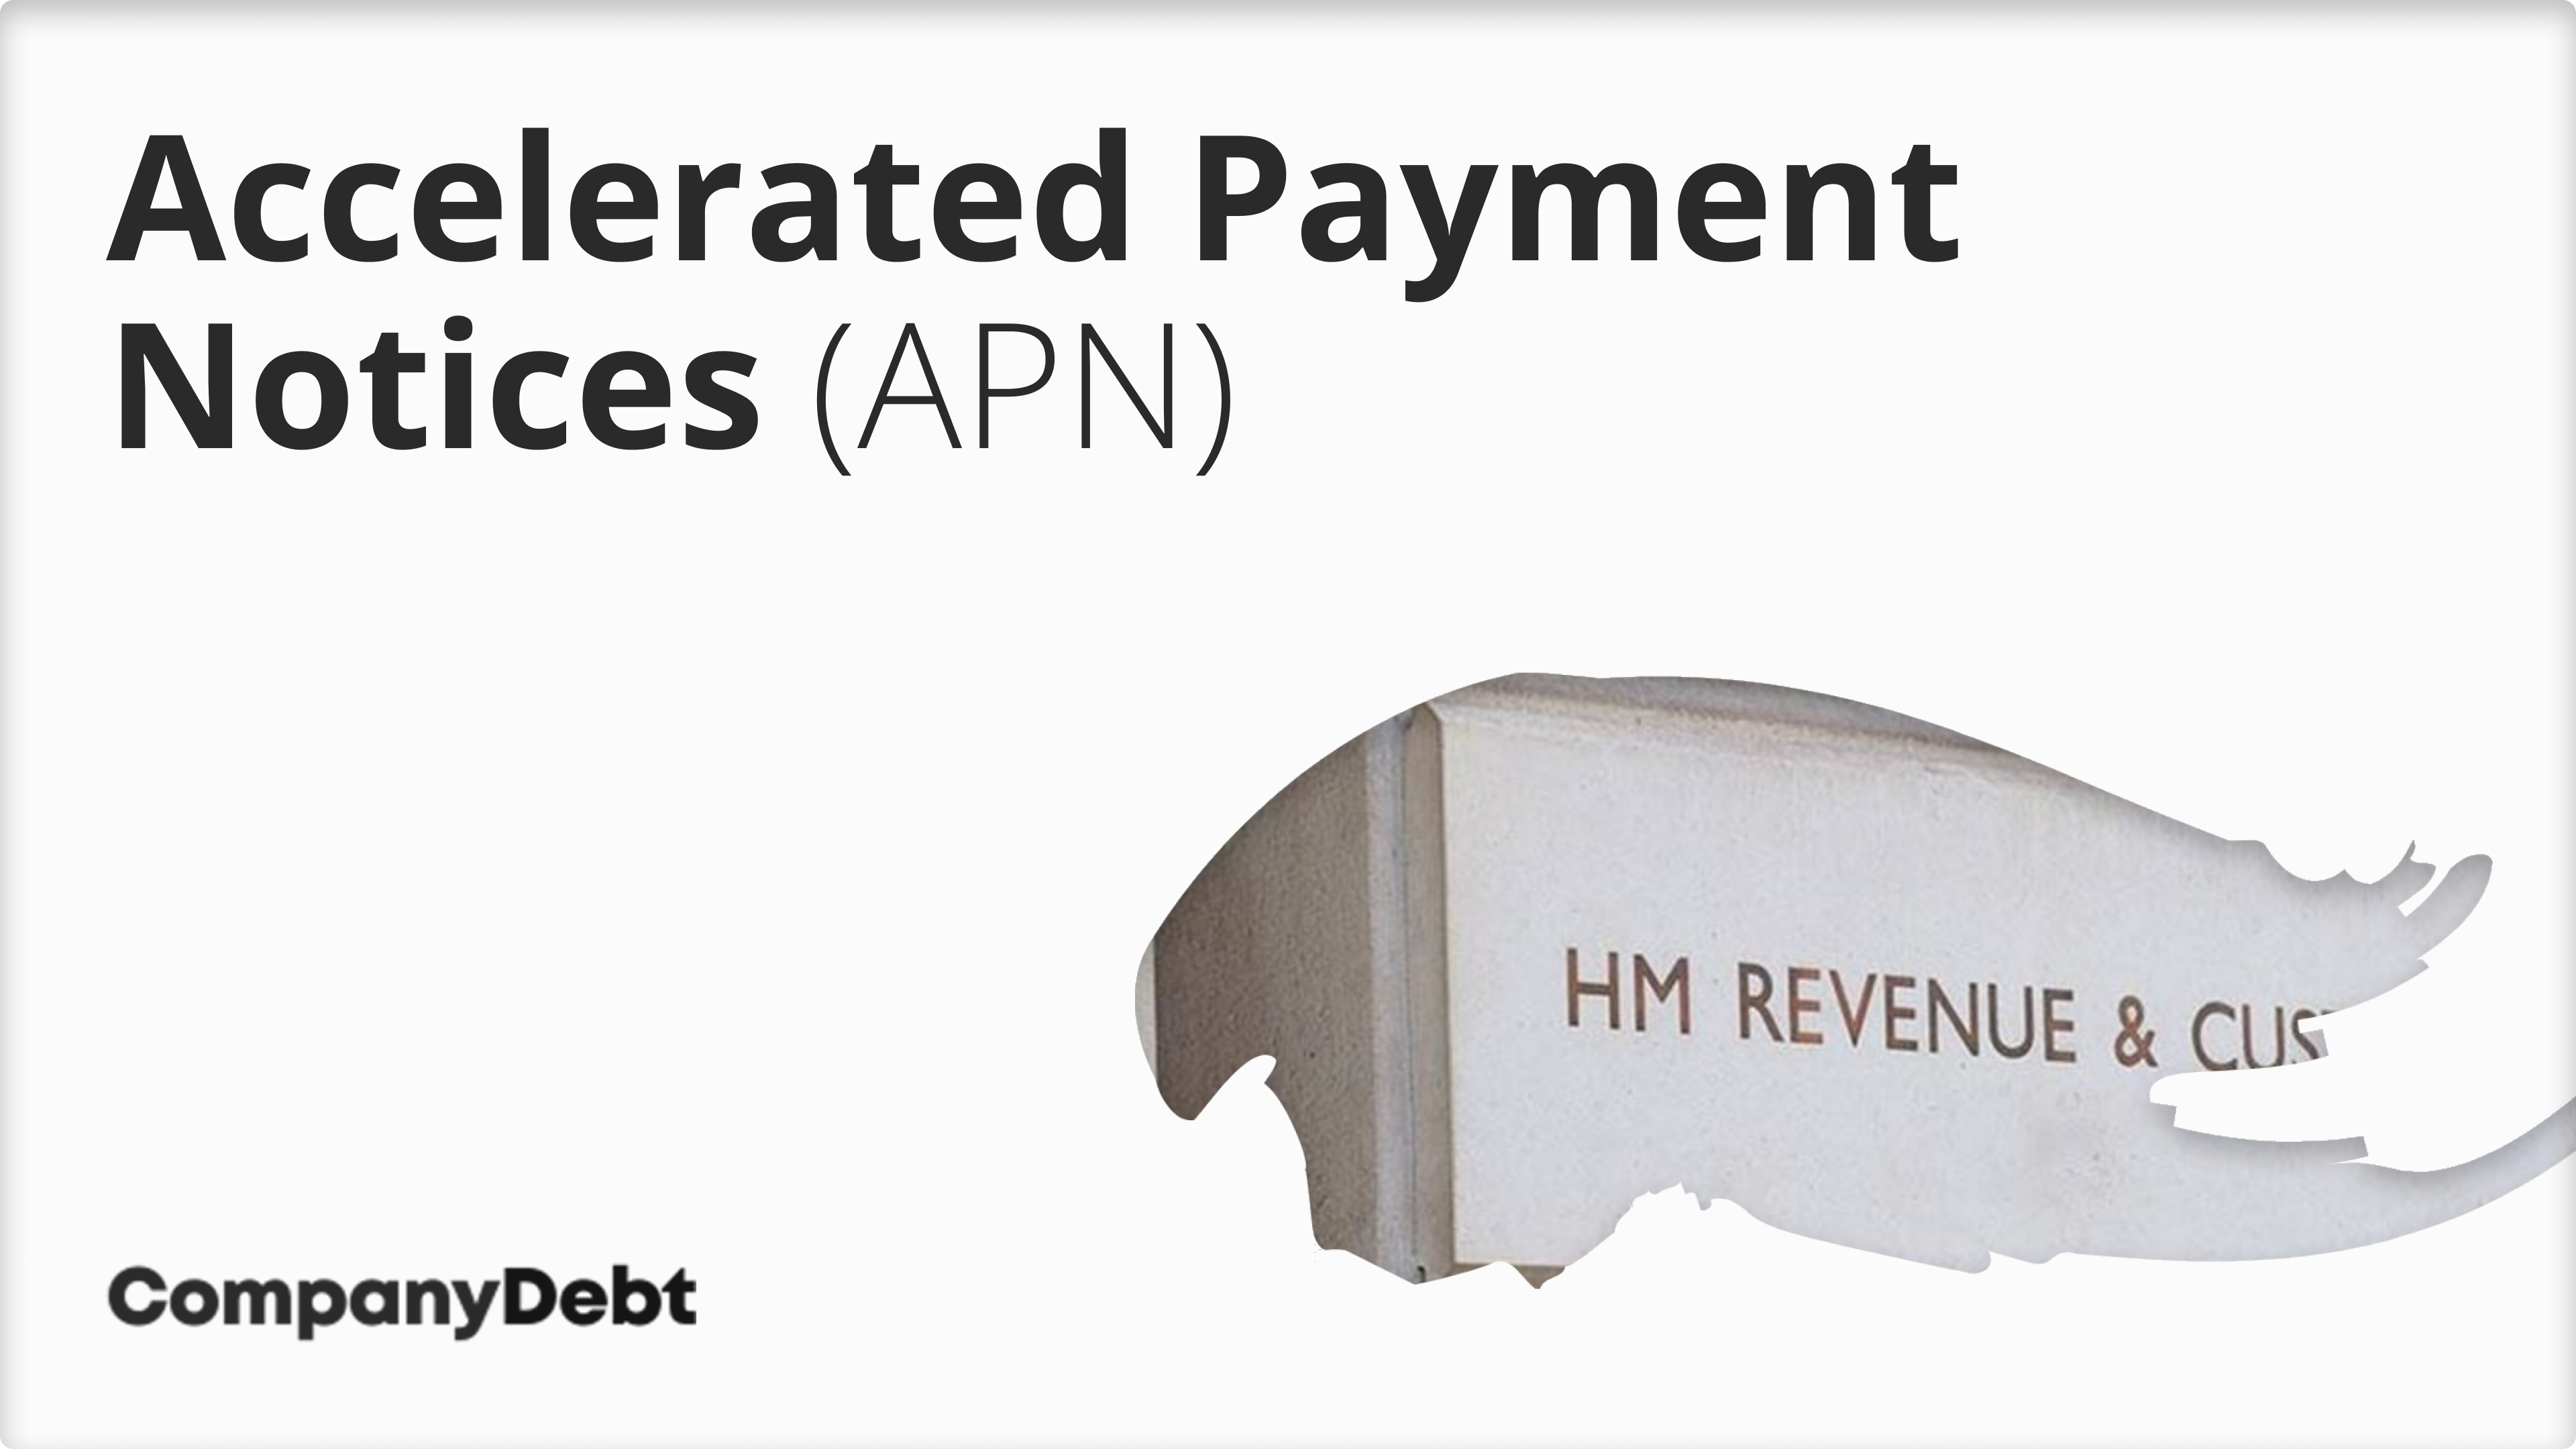 Accelerated-Payment-Notices-APN